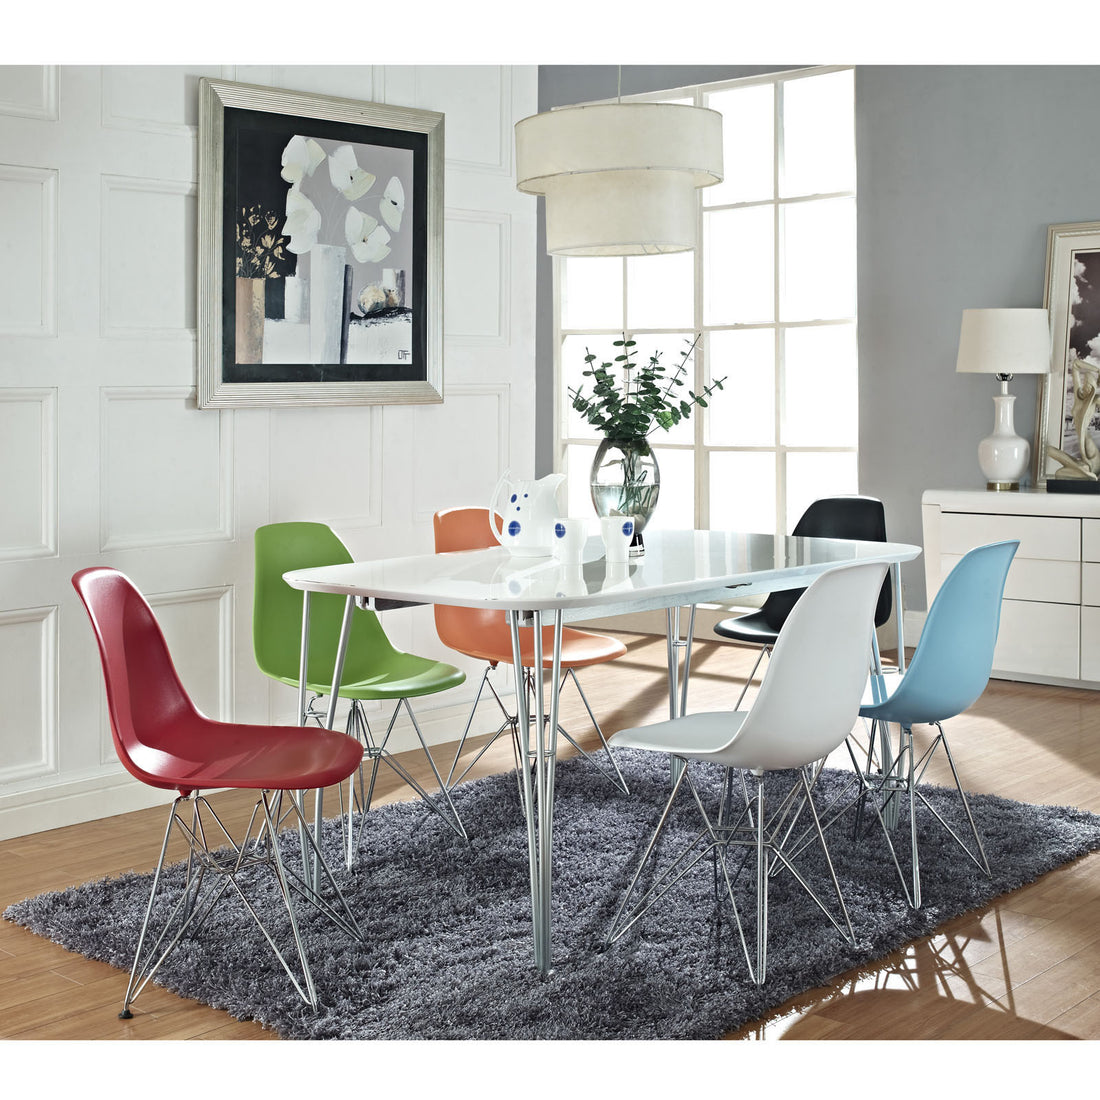 Mid Century Modern Dining chairs: Our Top 5